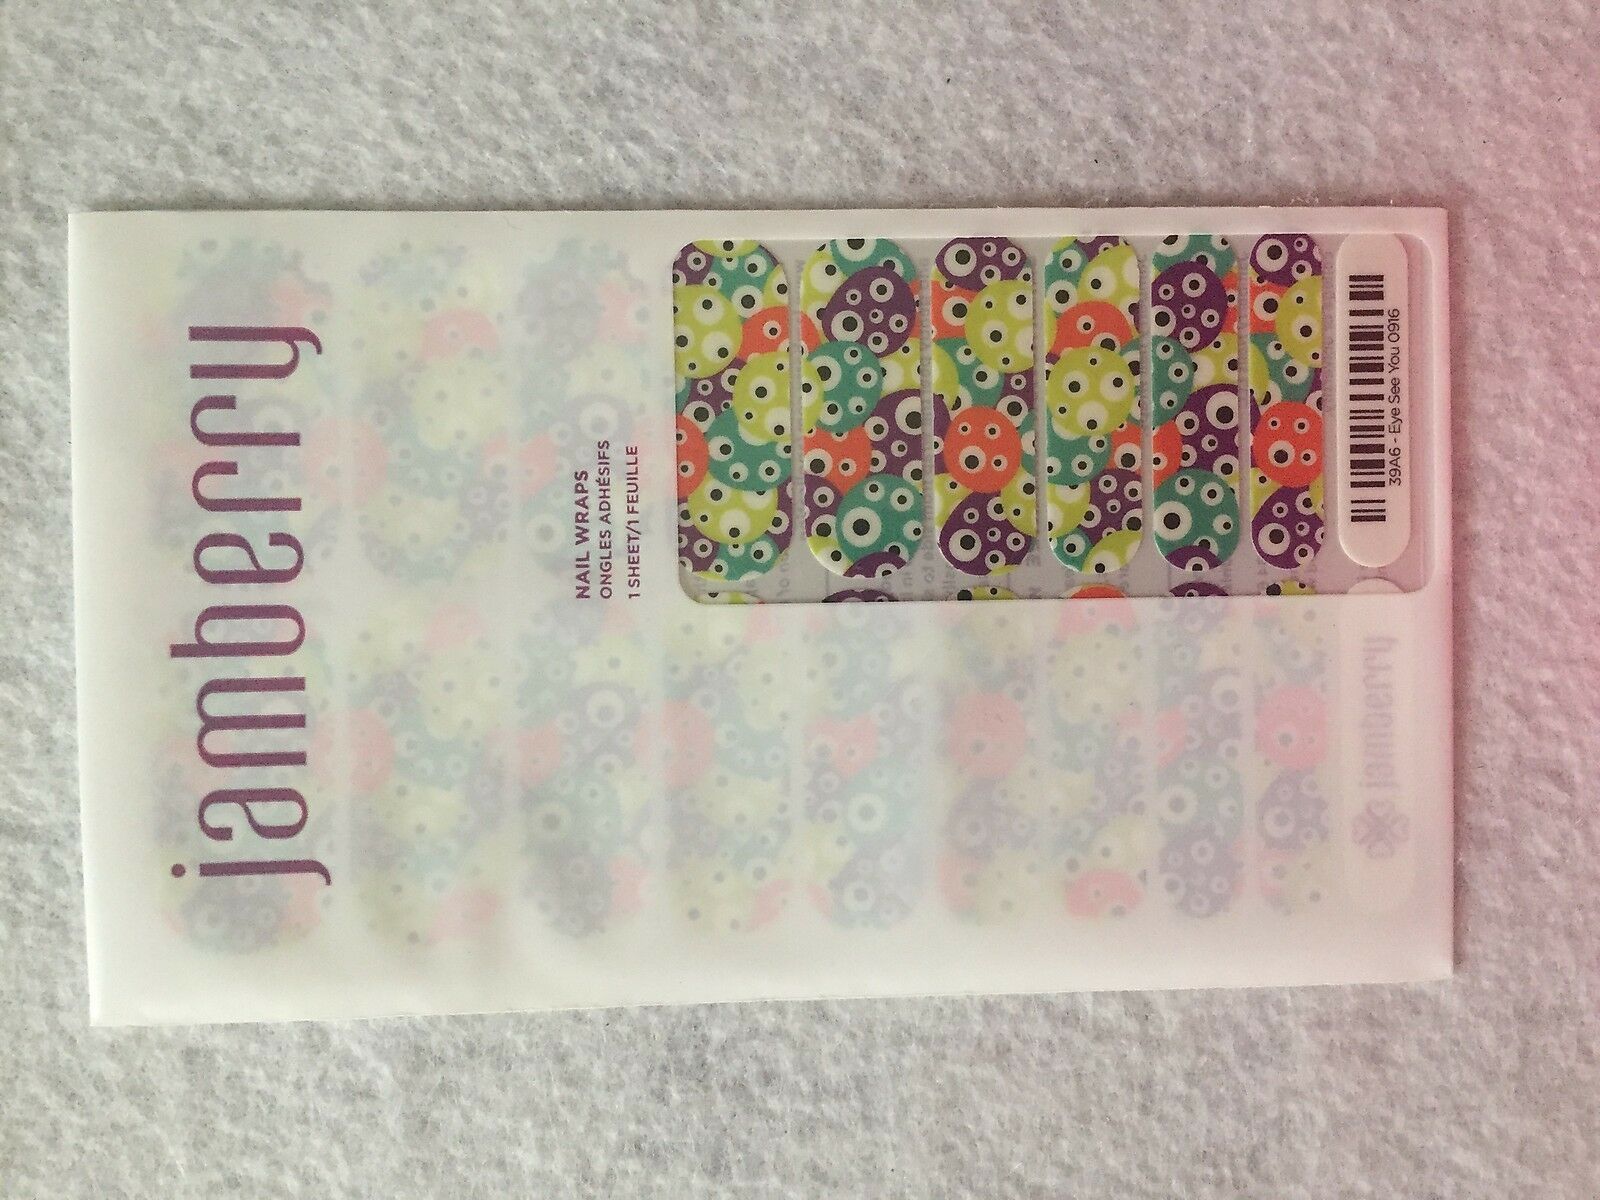 Primary image for Jamberry Nail Wraps 1/2 Sheet (new) Eye See You 0916